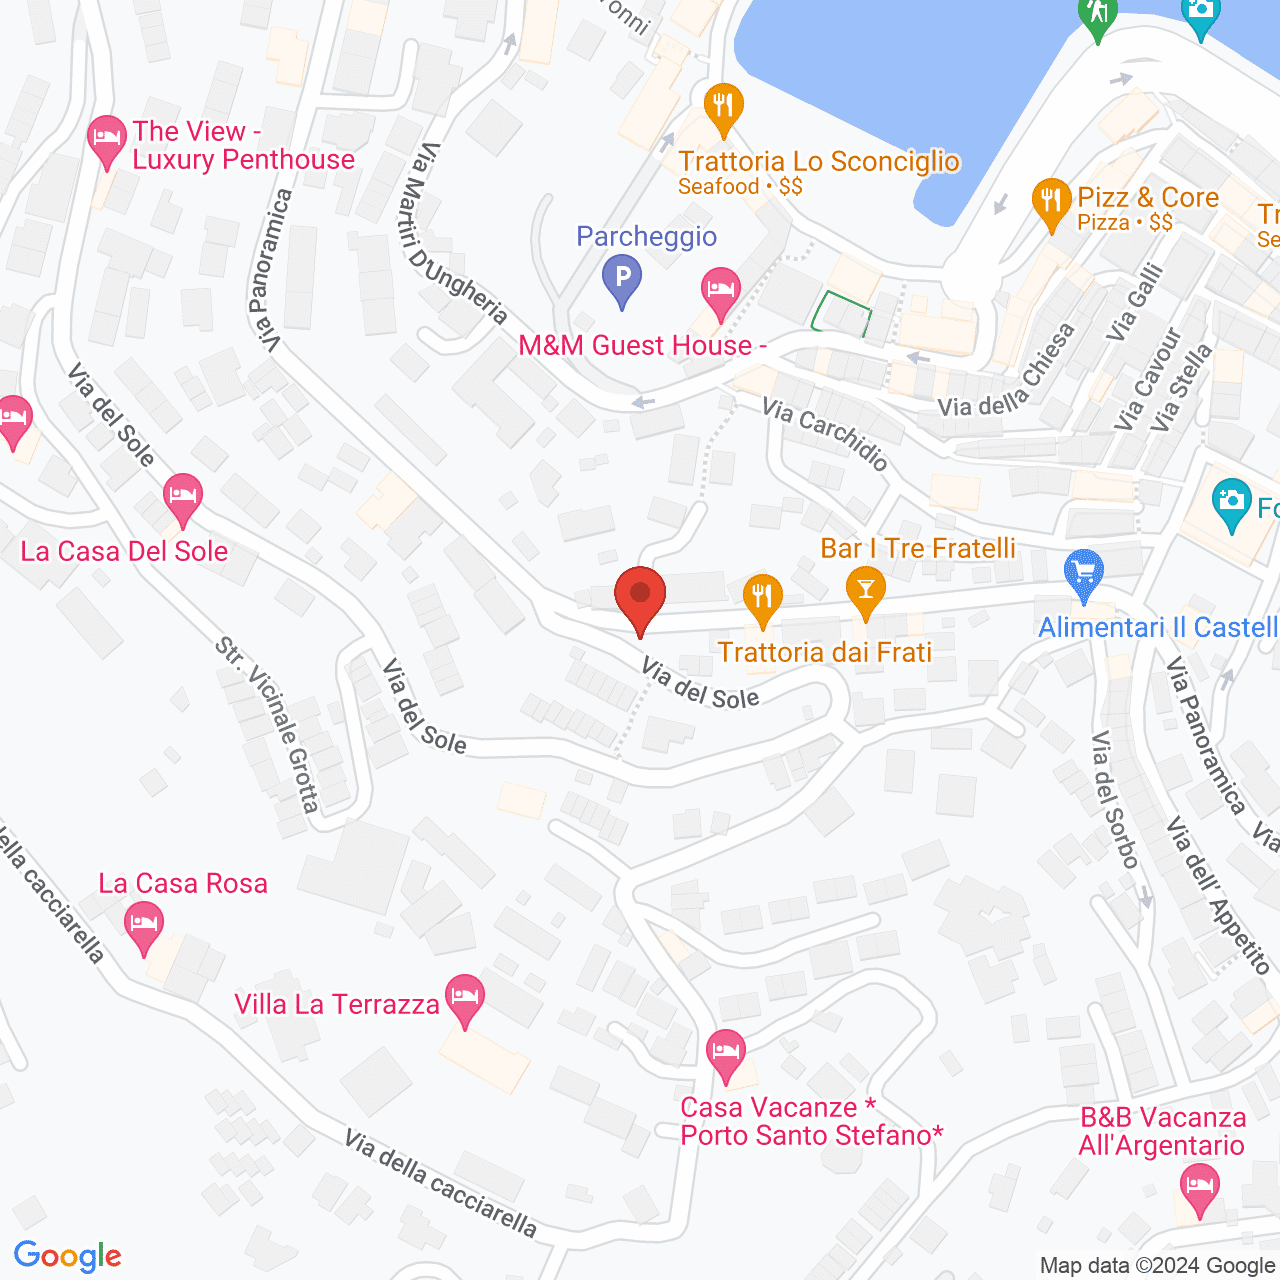 https://maps.googleapis.com/maps/api/staticmap?zoom=10&maptype=hybrid&scale=4&center=42.4374939,11.1149496&markers=color:red%7C%7C42.4374939,11.1149496&size=1000x1000&key=AIzaSyAQg6Liu52-a7wn17F9B-5c4QmJ9kTO3Mo